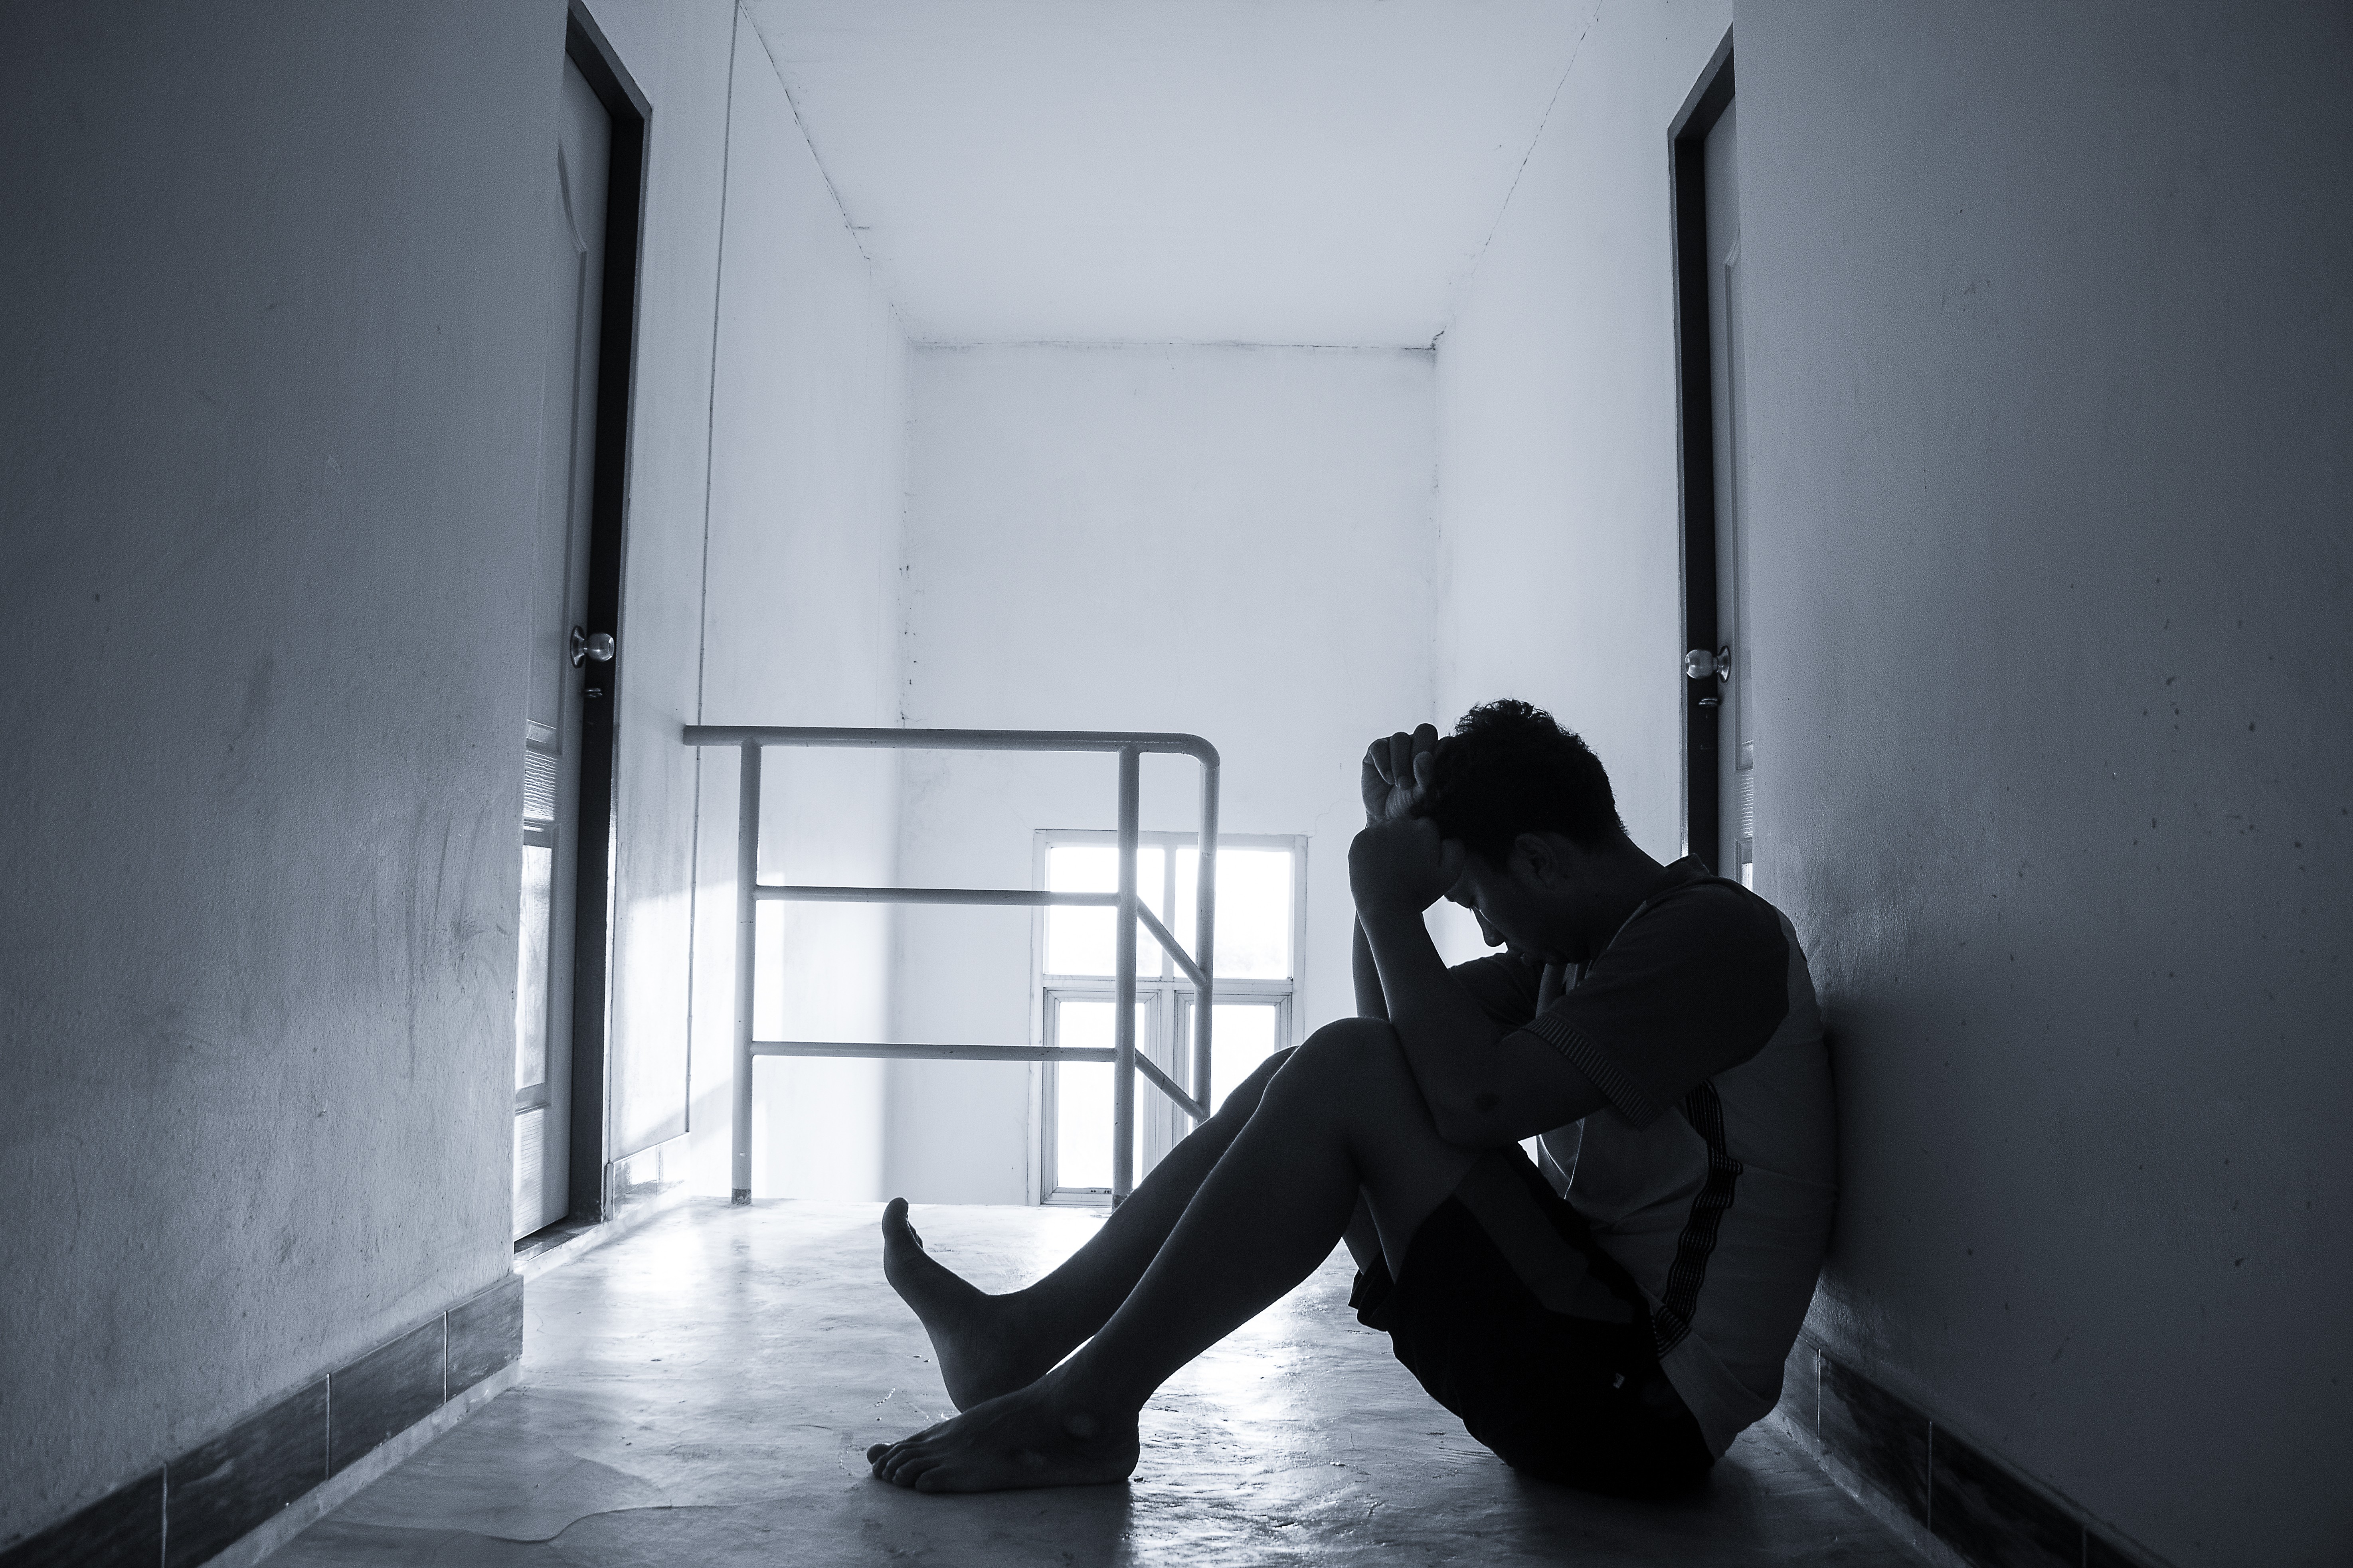 Three in every 100 Hongkongers aged between 16 and 75 suffer from depression, according to figures from the Centre for Health Protection. Photo: Shutterstock